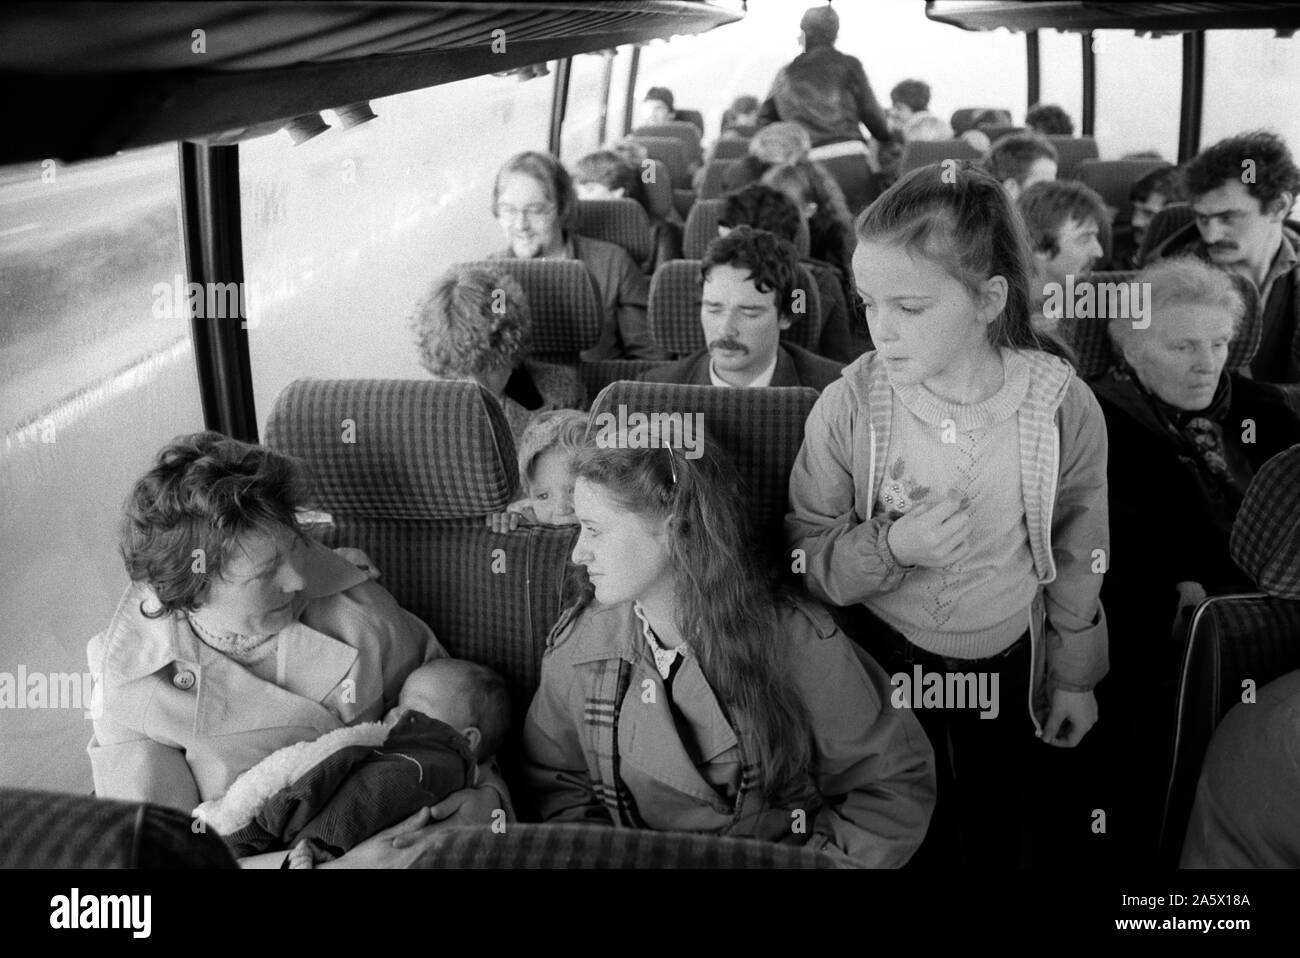 The Troubles 1980s Derry Northern Ireland Londonderry 1983.  Catholic families on coach to visit relatives on remand and are imprisoned in the Crumlin Road prison jail Belfast 80s UK HOMER SYKES Stock Photo